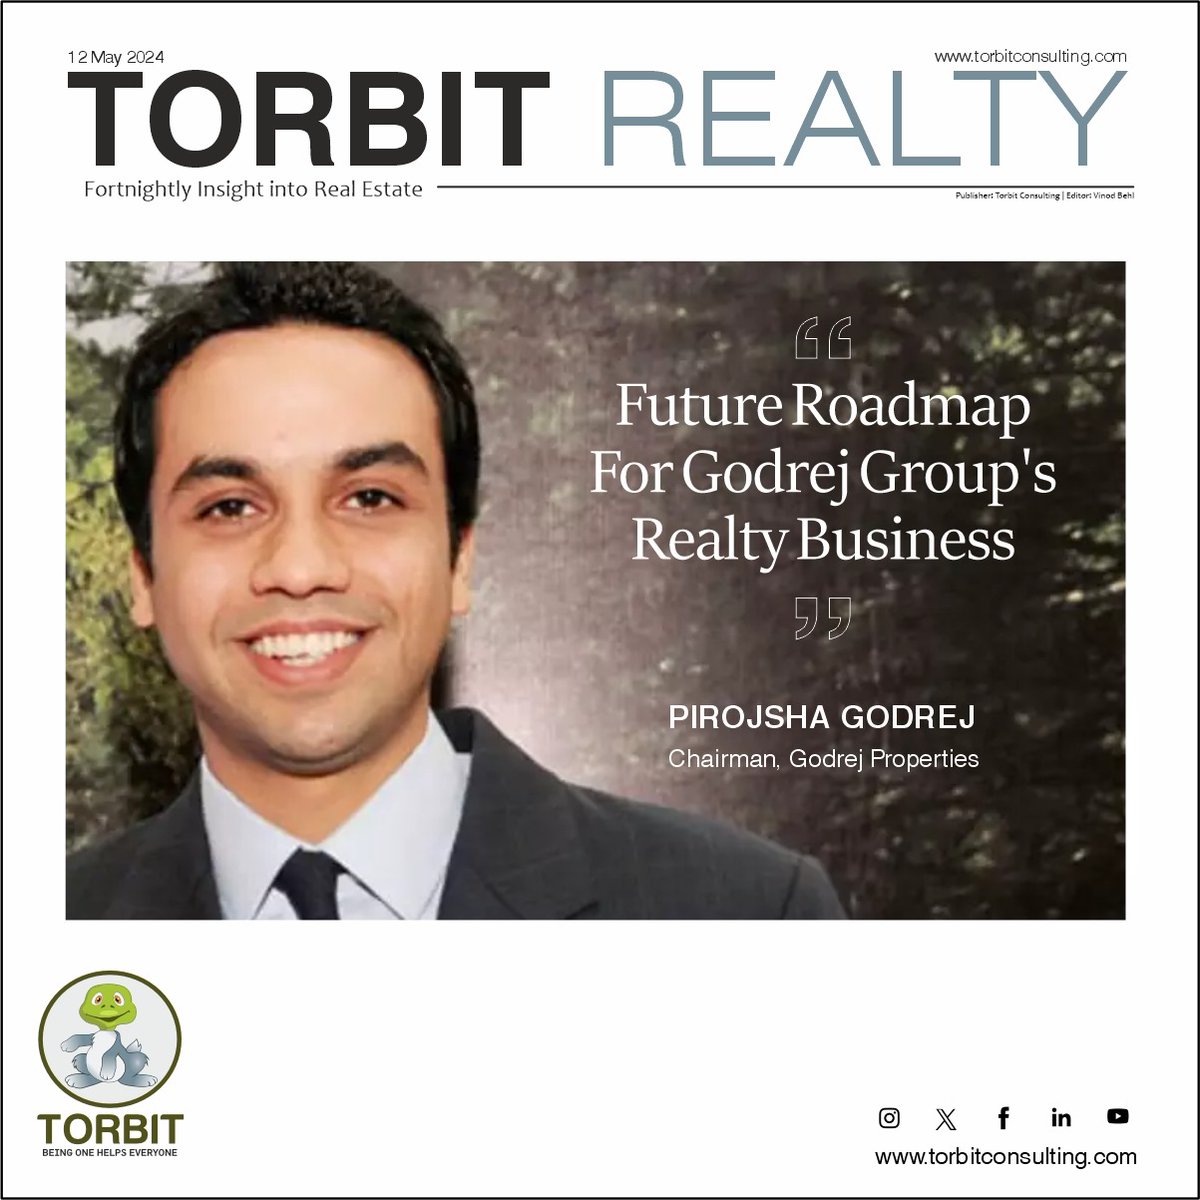 Experience the future of real estate with Godrej Group's dynamic roadmap, guided by Chairman Projsha Godrej's vision!

Read more: shorturl.at/wBKV9

#torbitrealty #GodrejRealty #godrejgroup #realestatebusiness #FutureOfRealEstate #FutureReady #ICICI #InnovationAhead